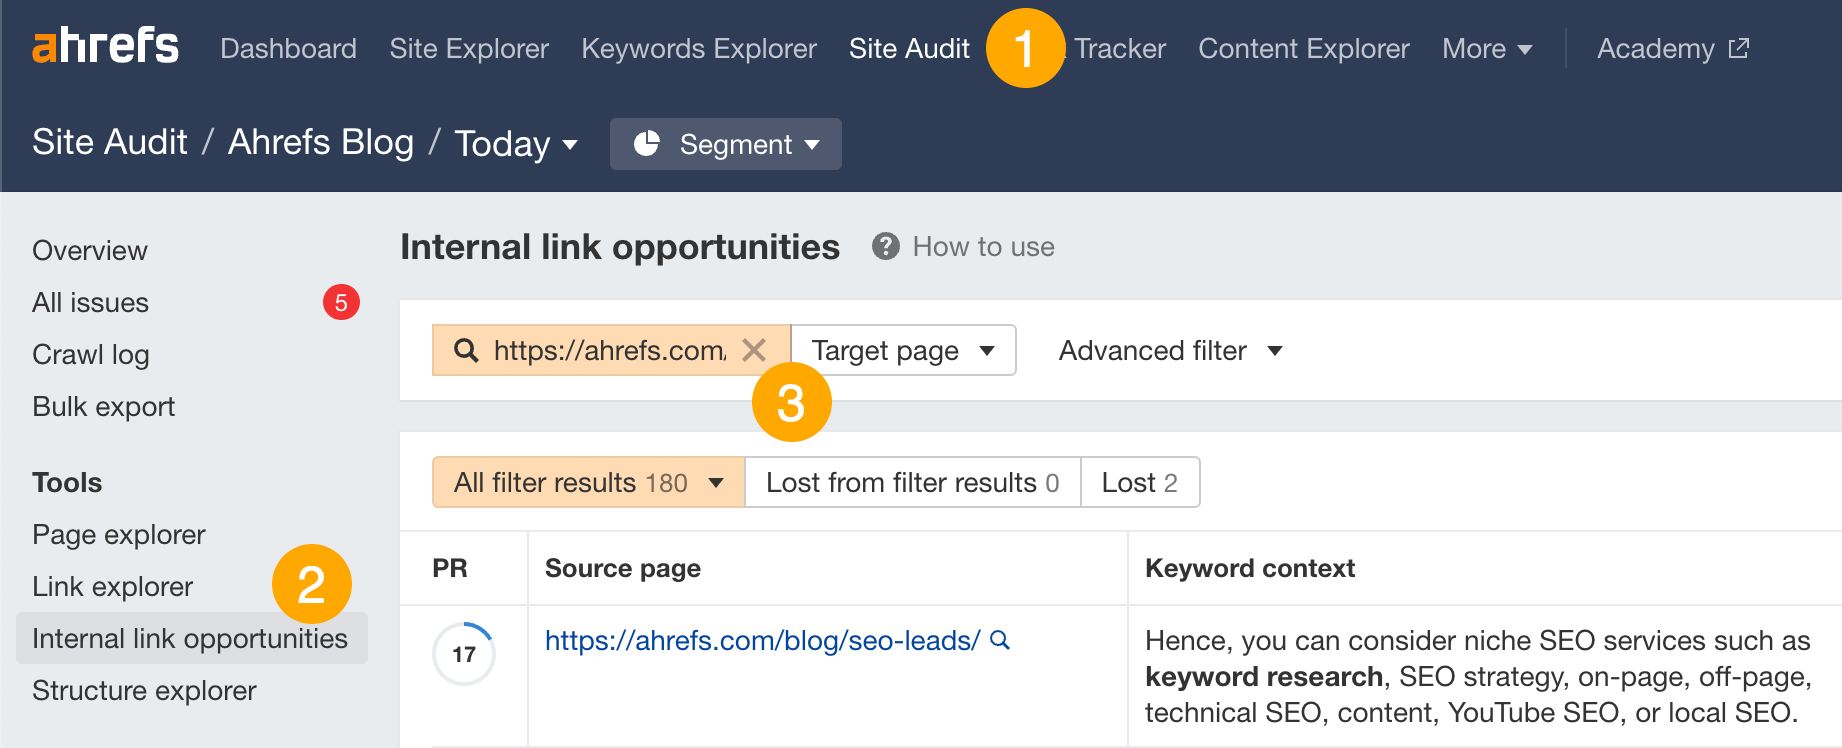 Using the Internal Link Opportunities tool in Site Audit to find internal links to add
